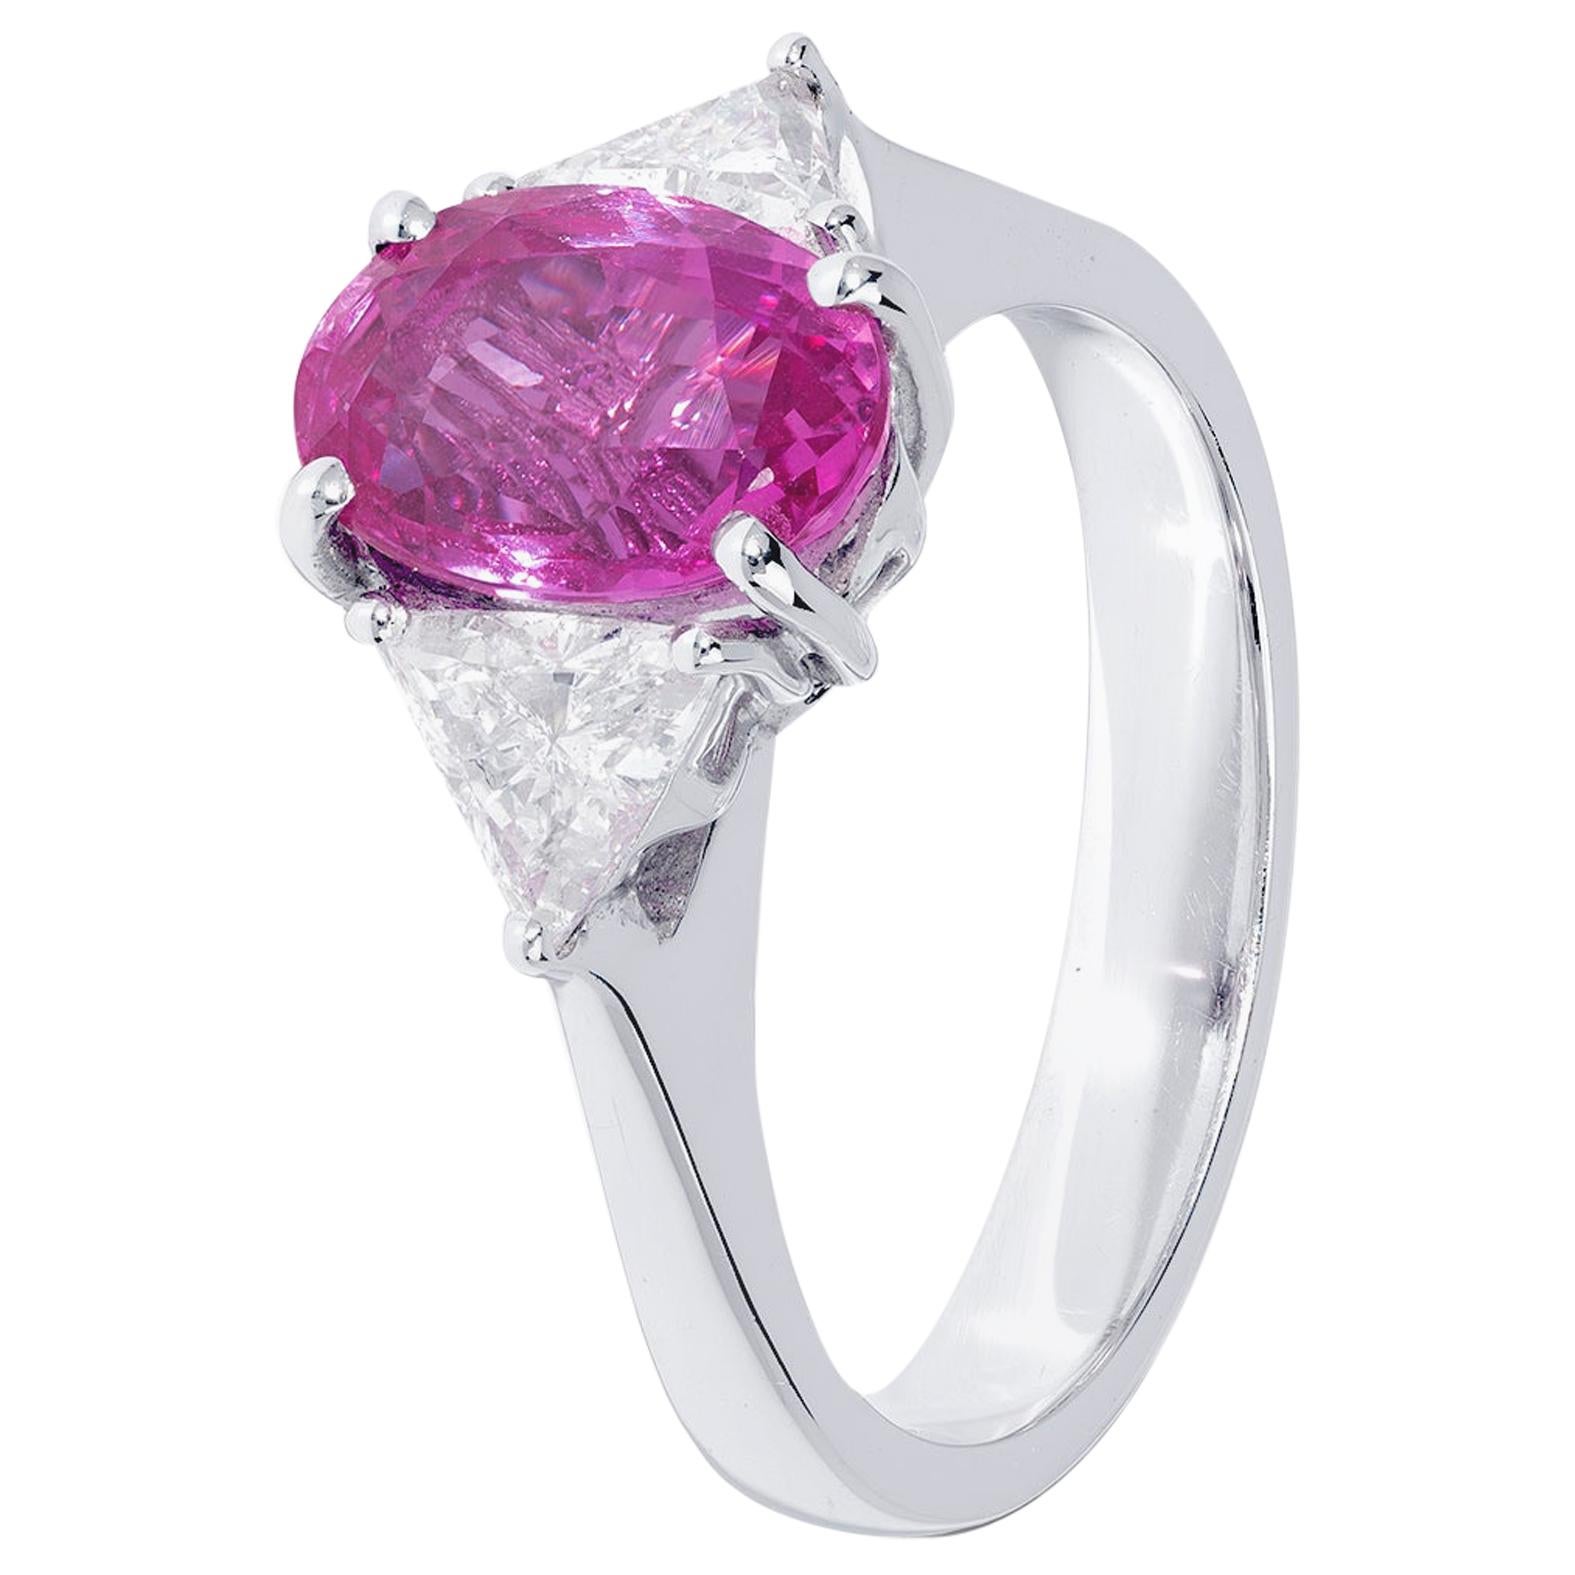 Unforgettable 3.20 Carat Pink Sapphire and White Diamond Three-Stone Ring For Sale